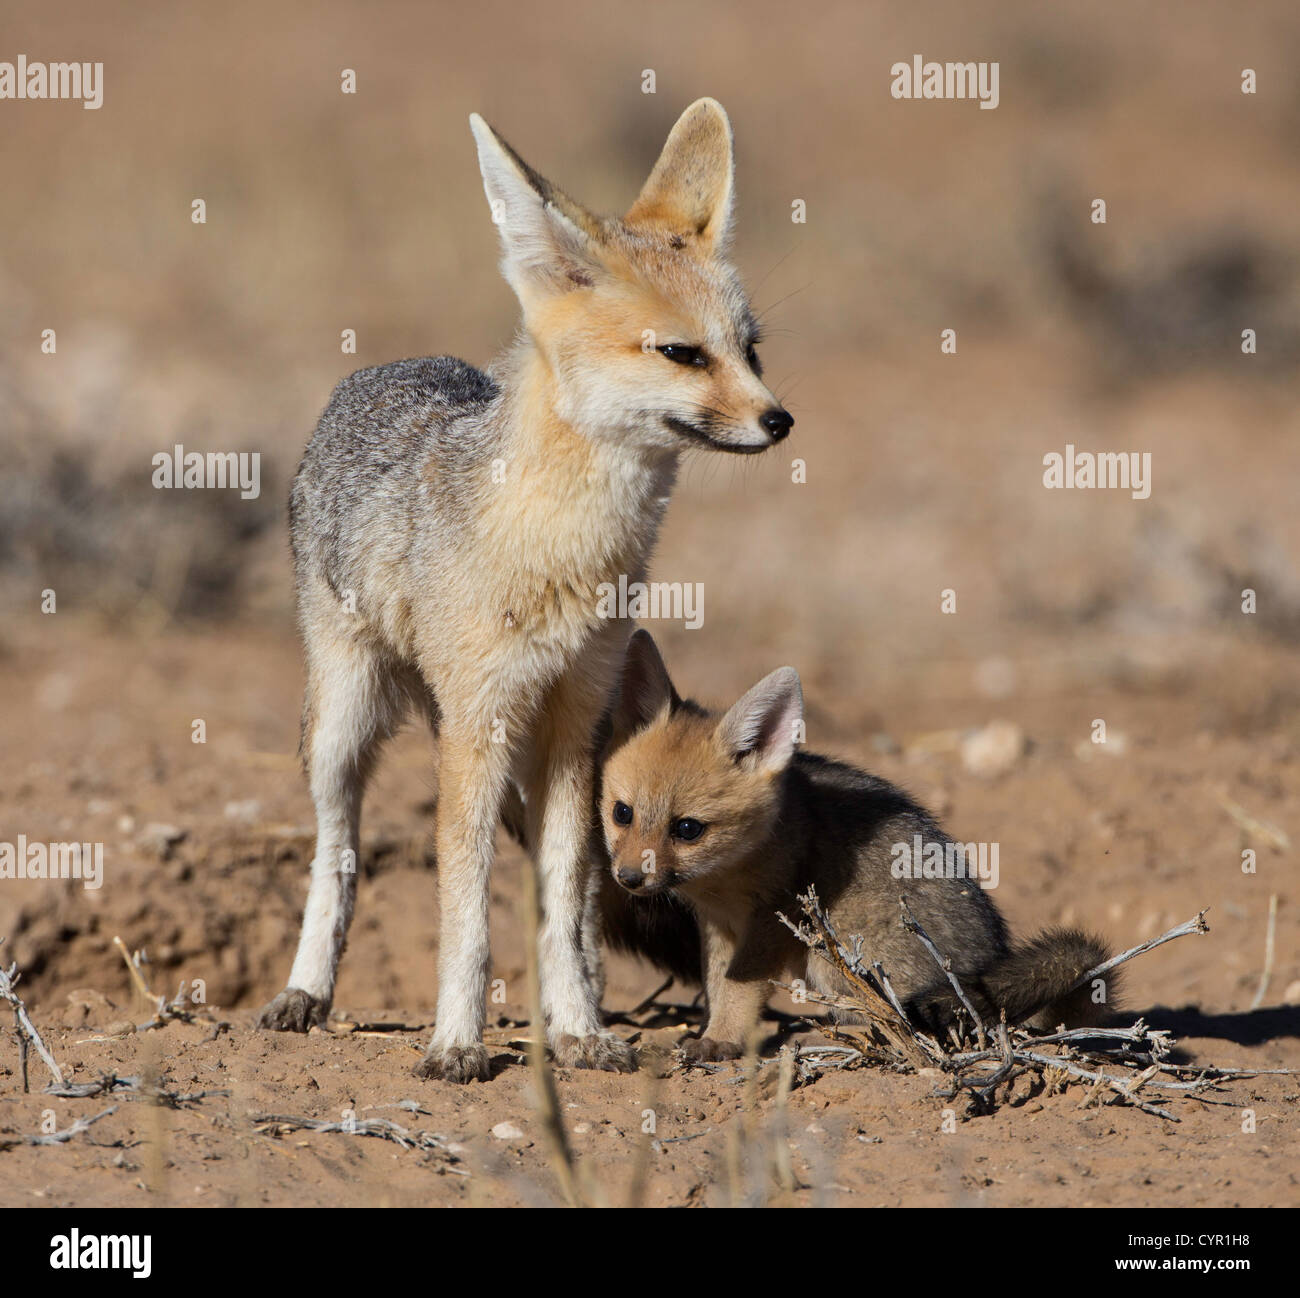 cape fox with baby playing Stock Photo